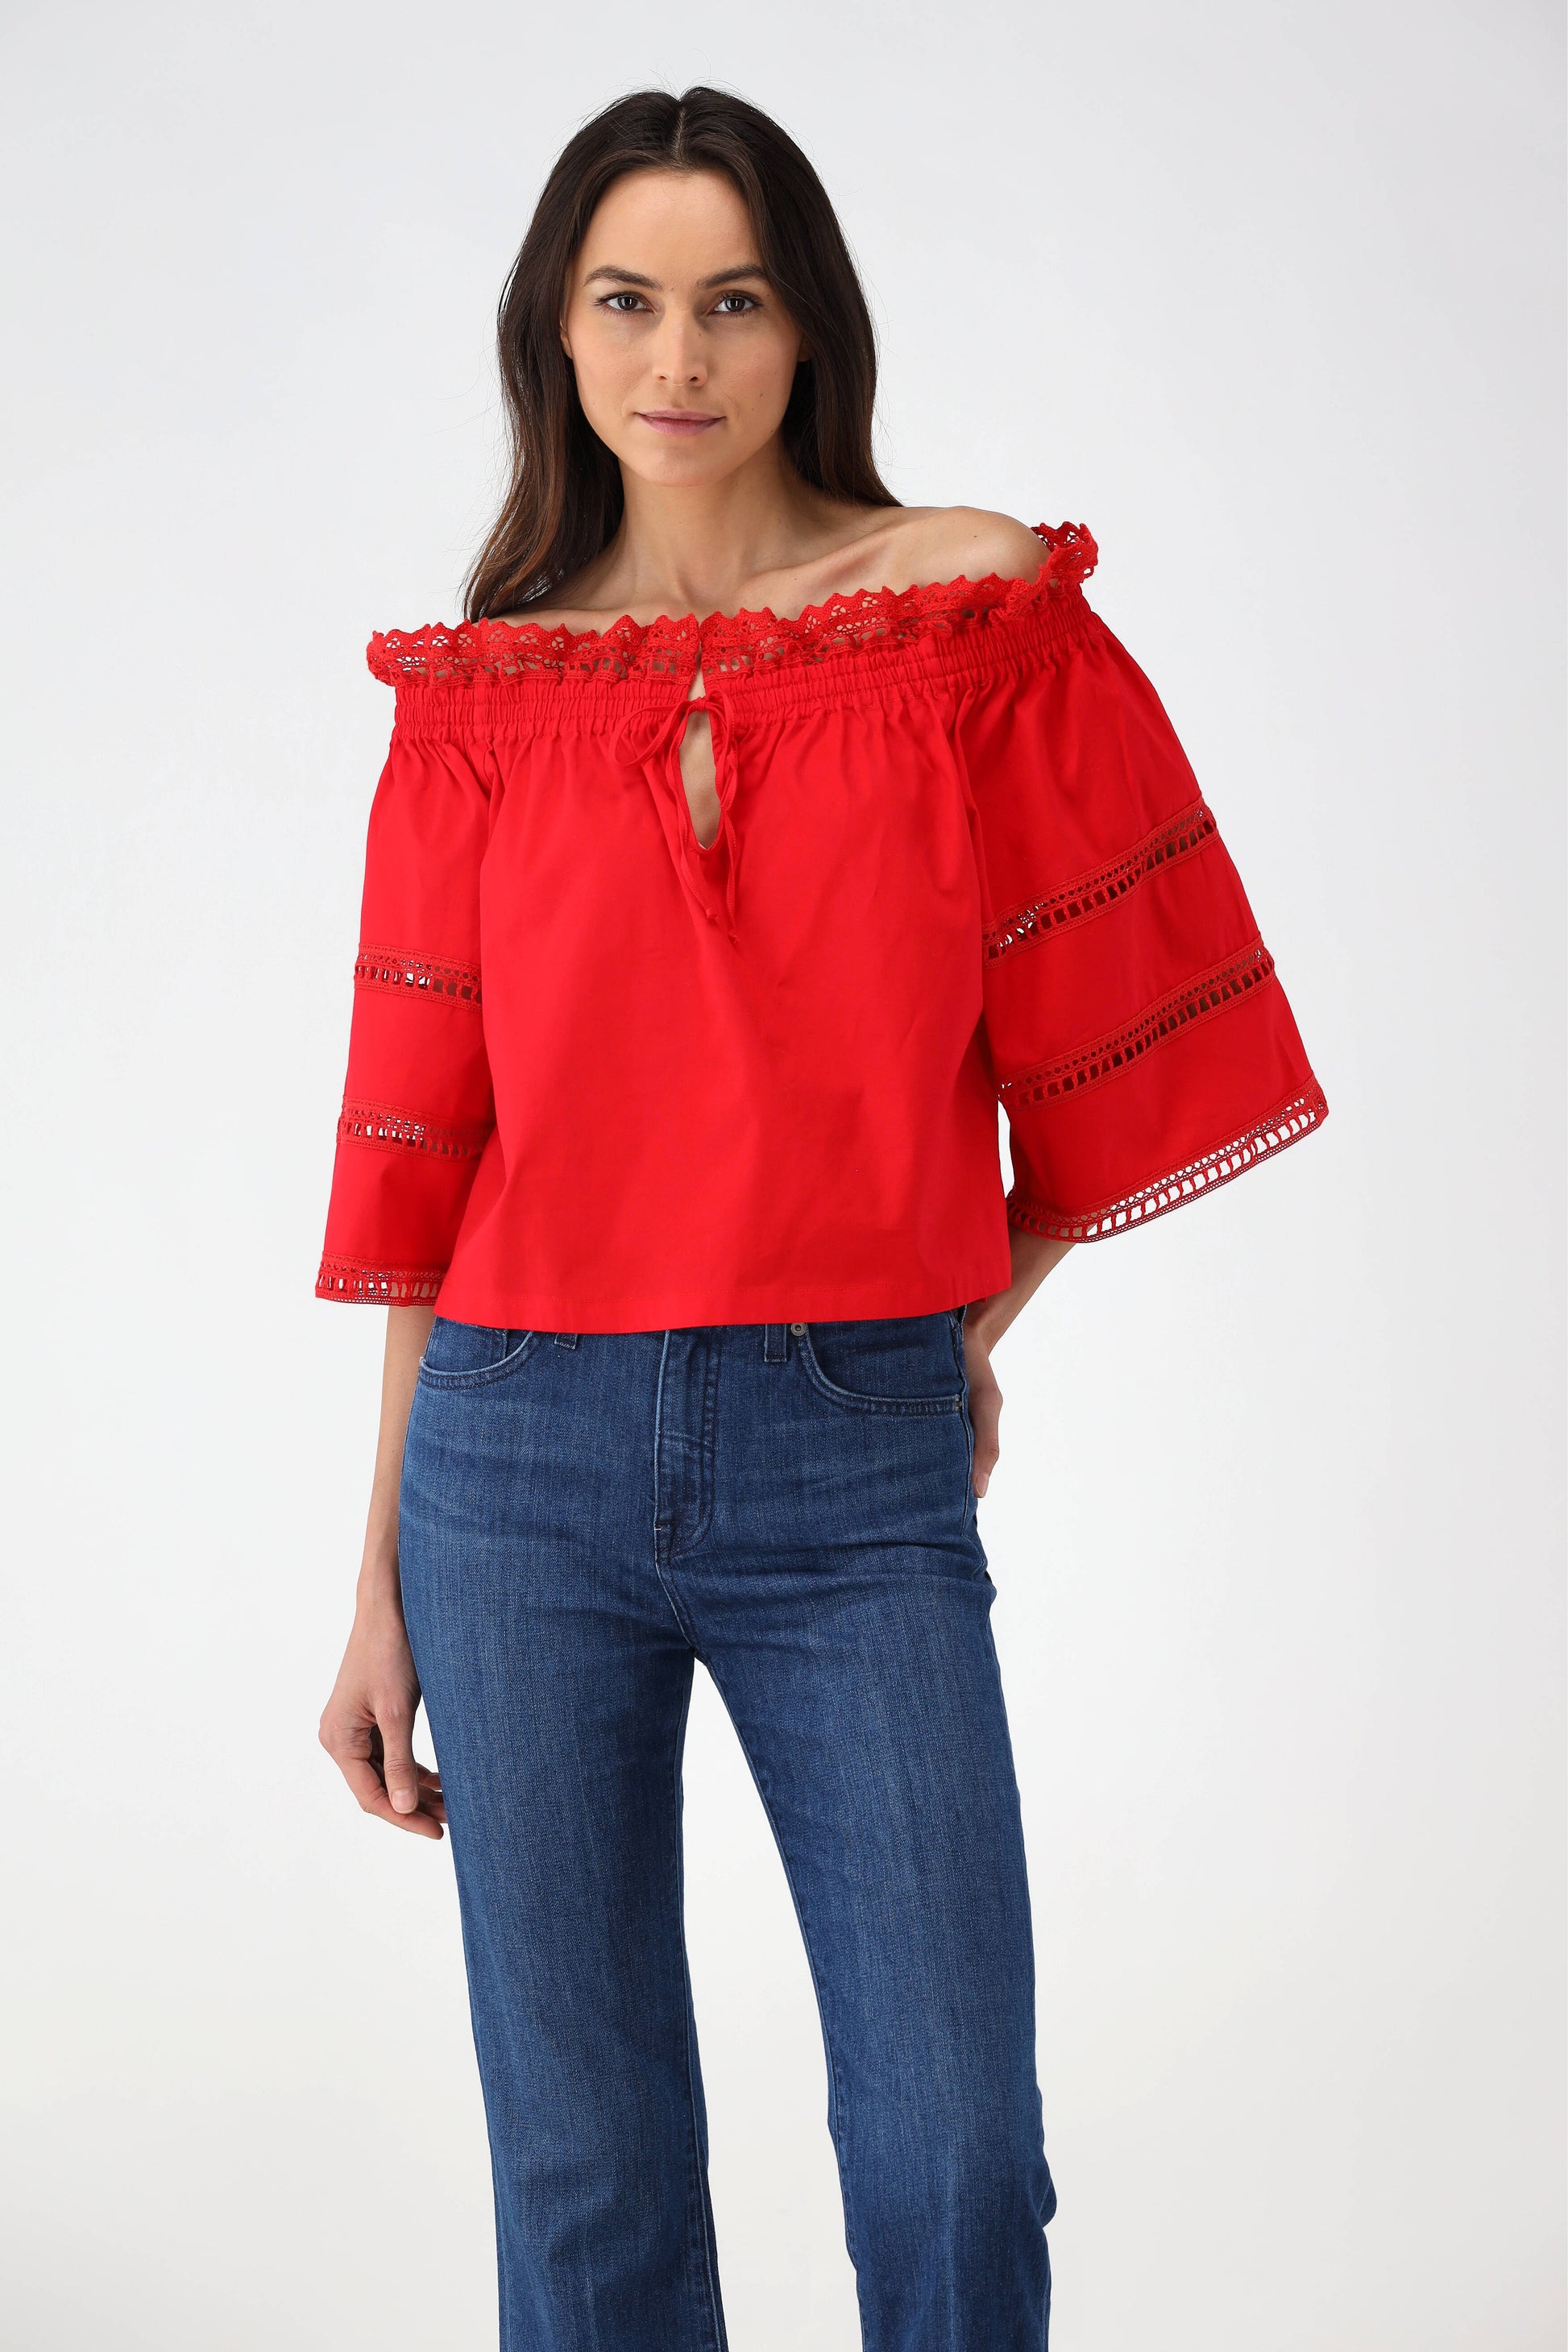 Off-Shoulder-Bluse in RotErmanno Scervino - Anita Hass